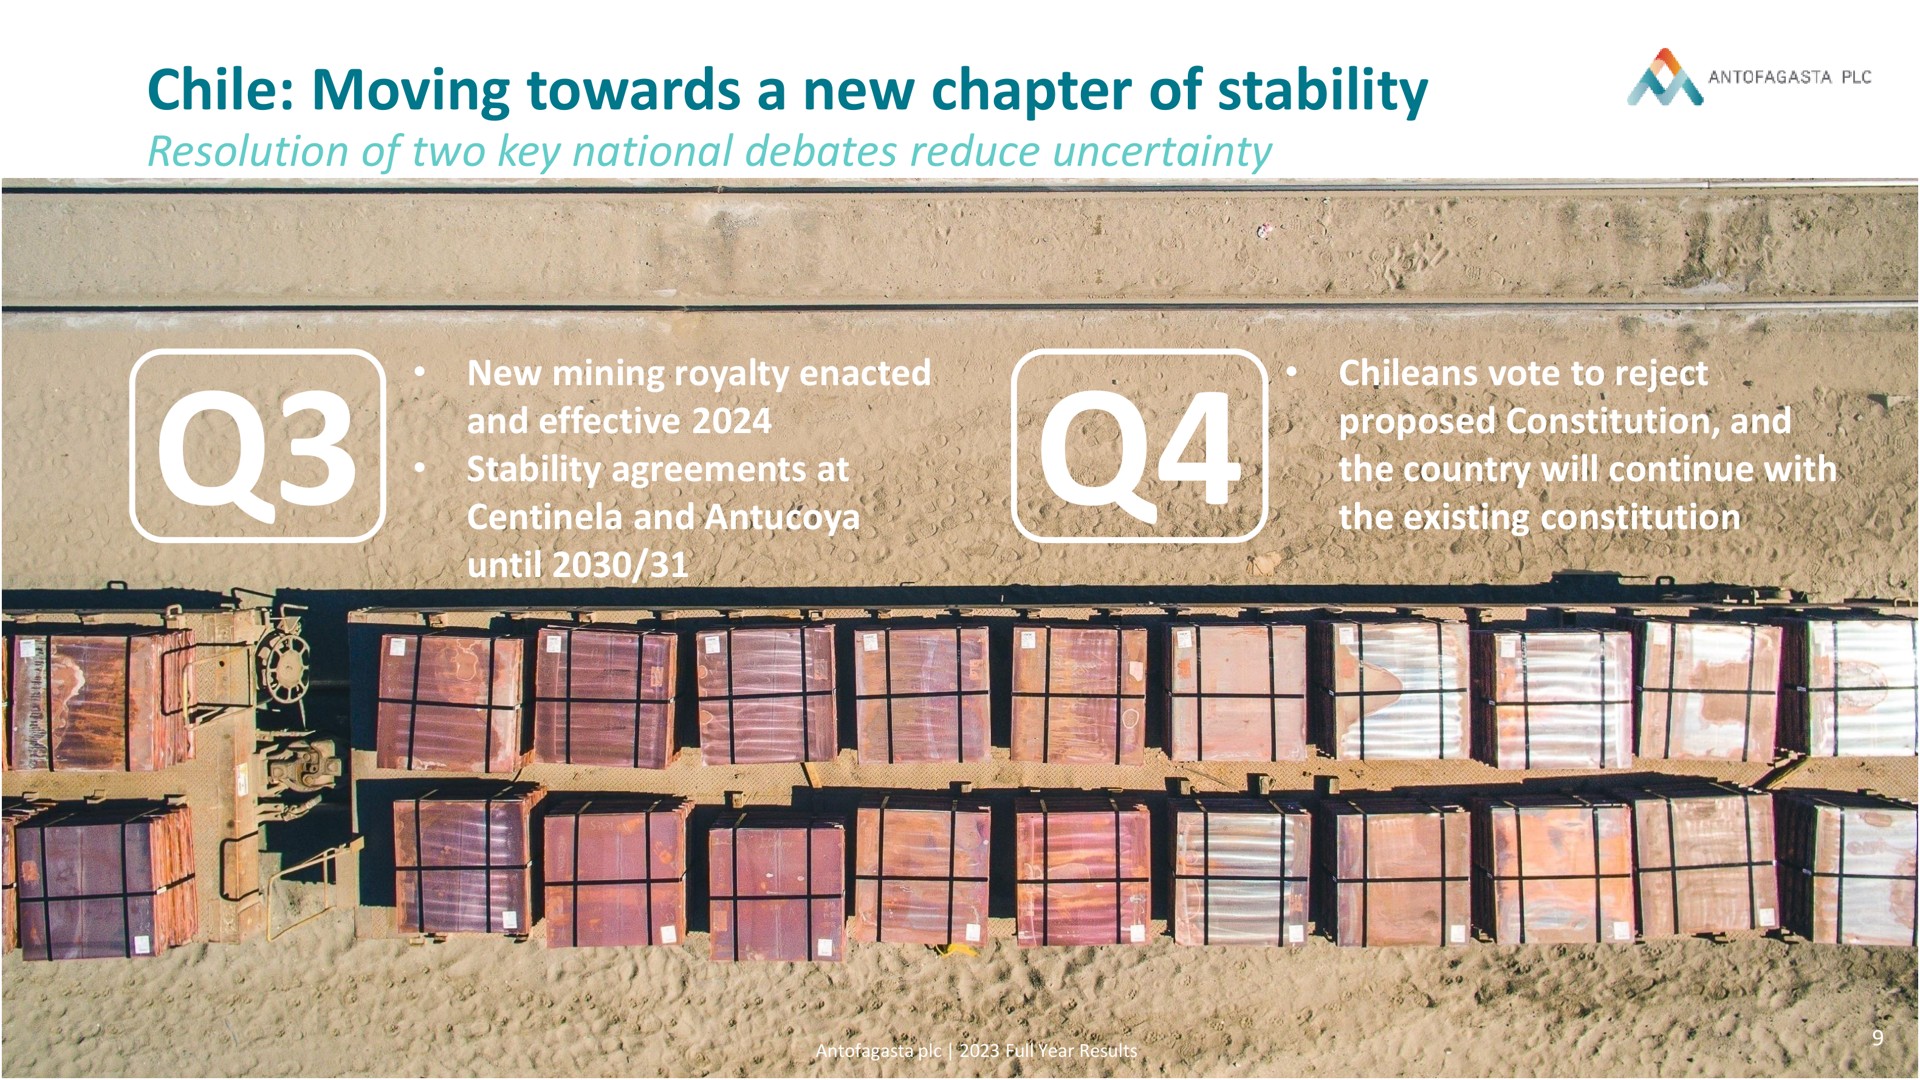 chile moving towards a new chapter of stability | Antofagasta